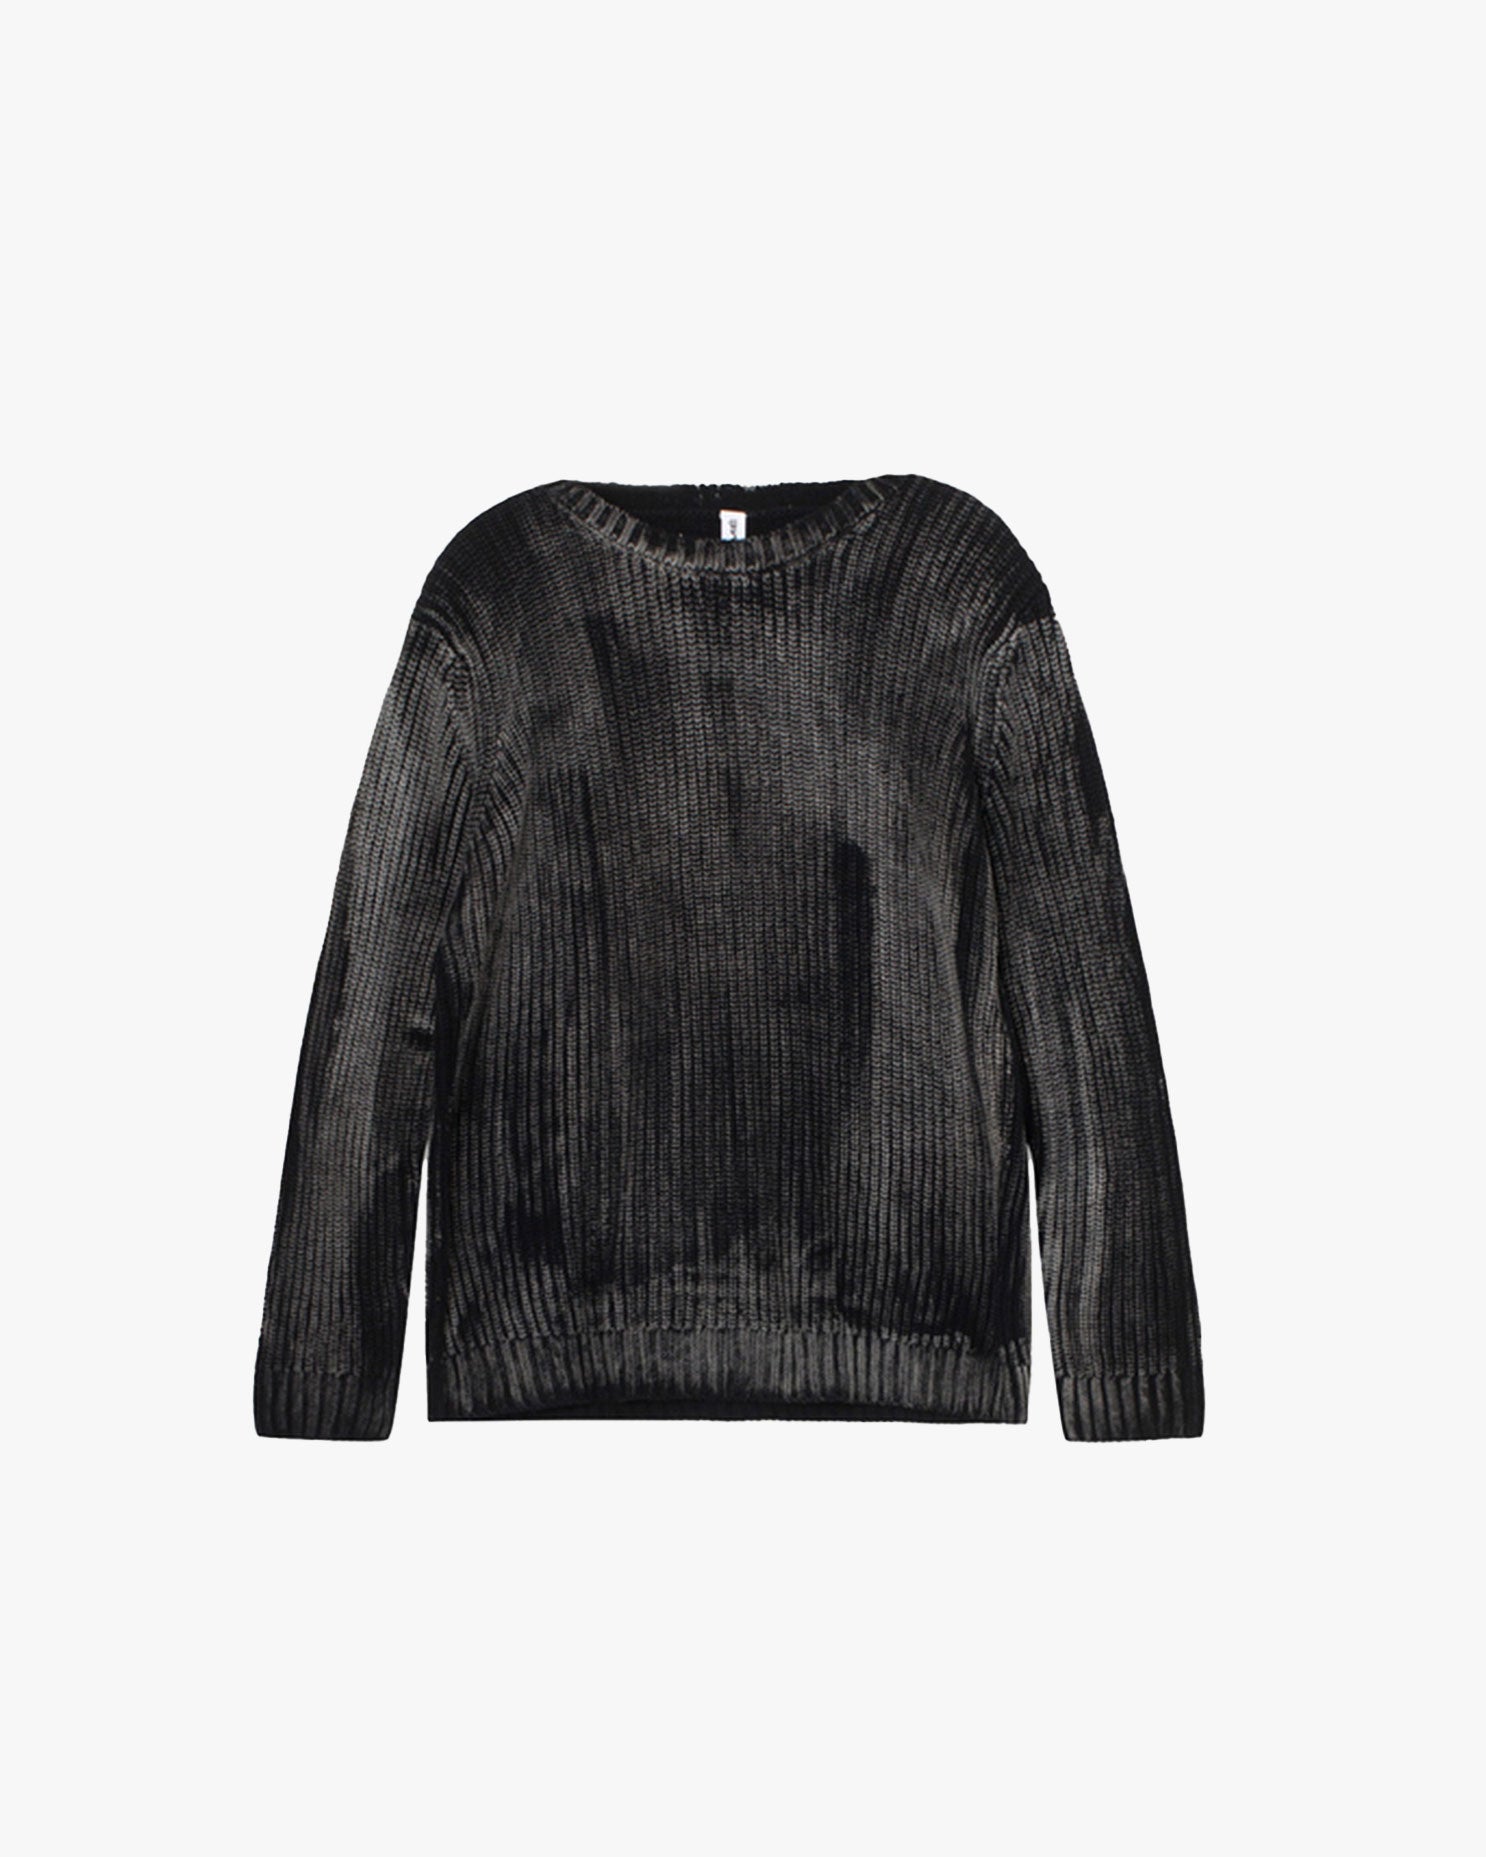 AtlasRS Knit Pullover Unisex in Charcoal